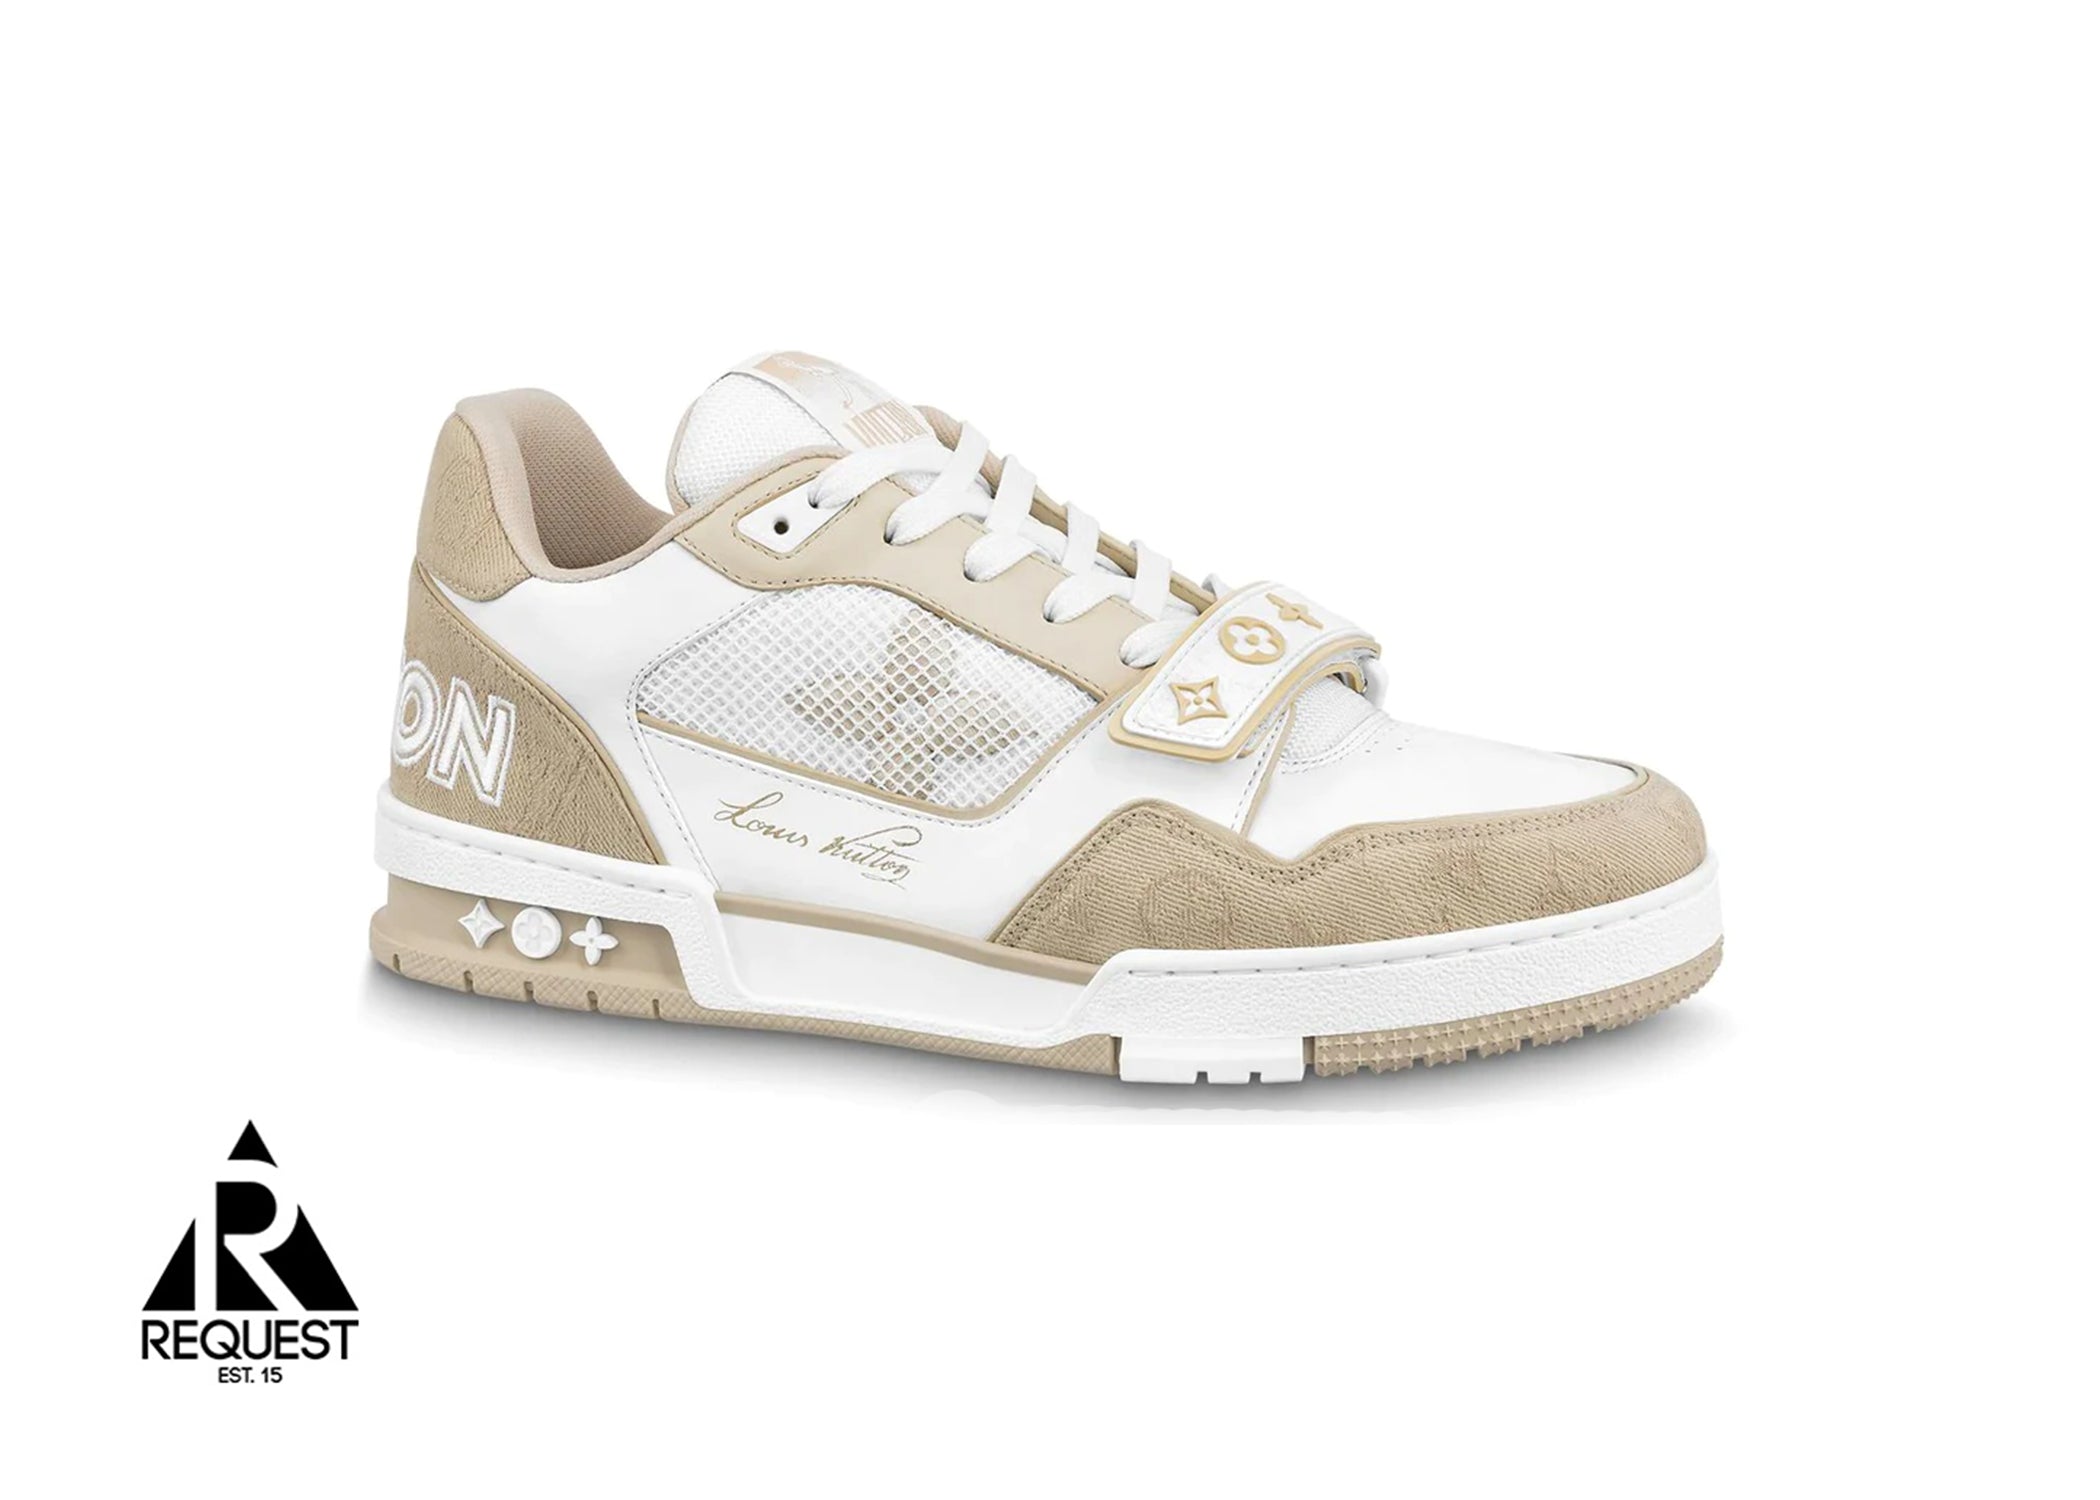 Louis Vuitton - White/Beige Trainer Sneakers with Strap – eluXive